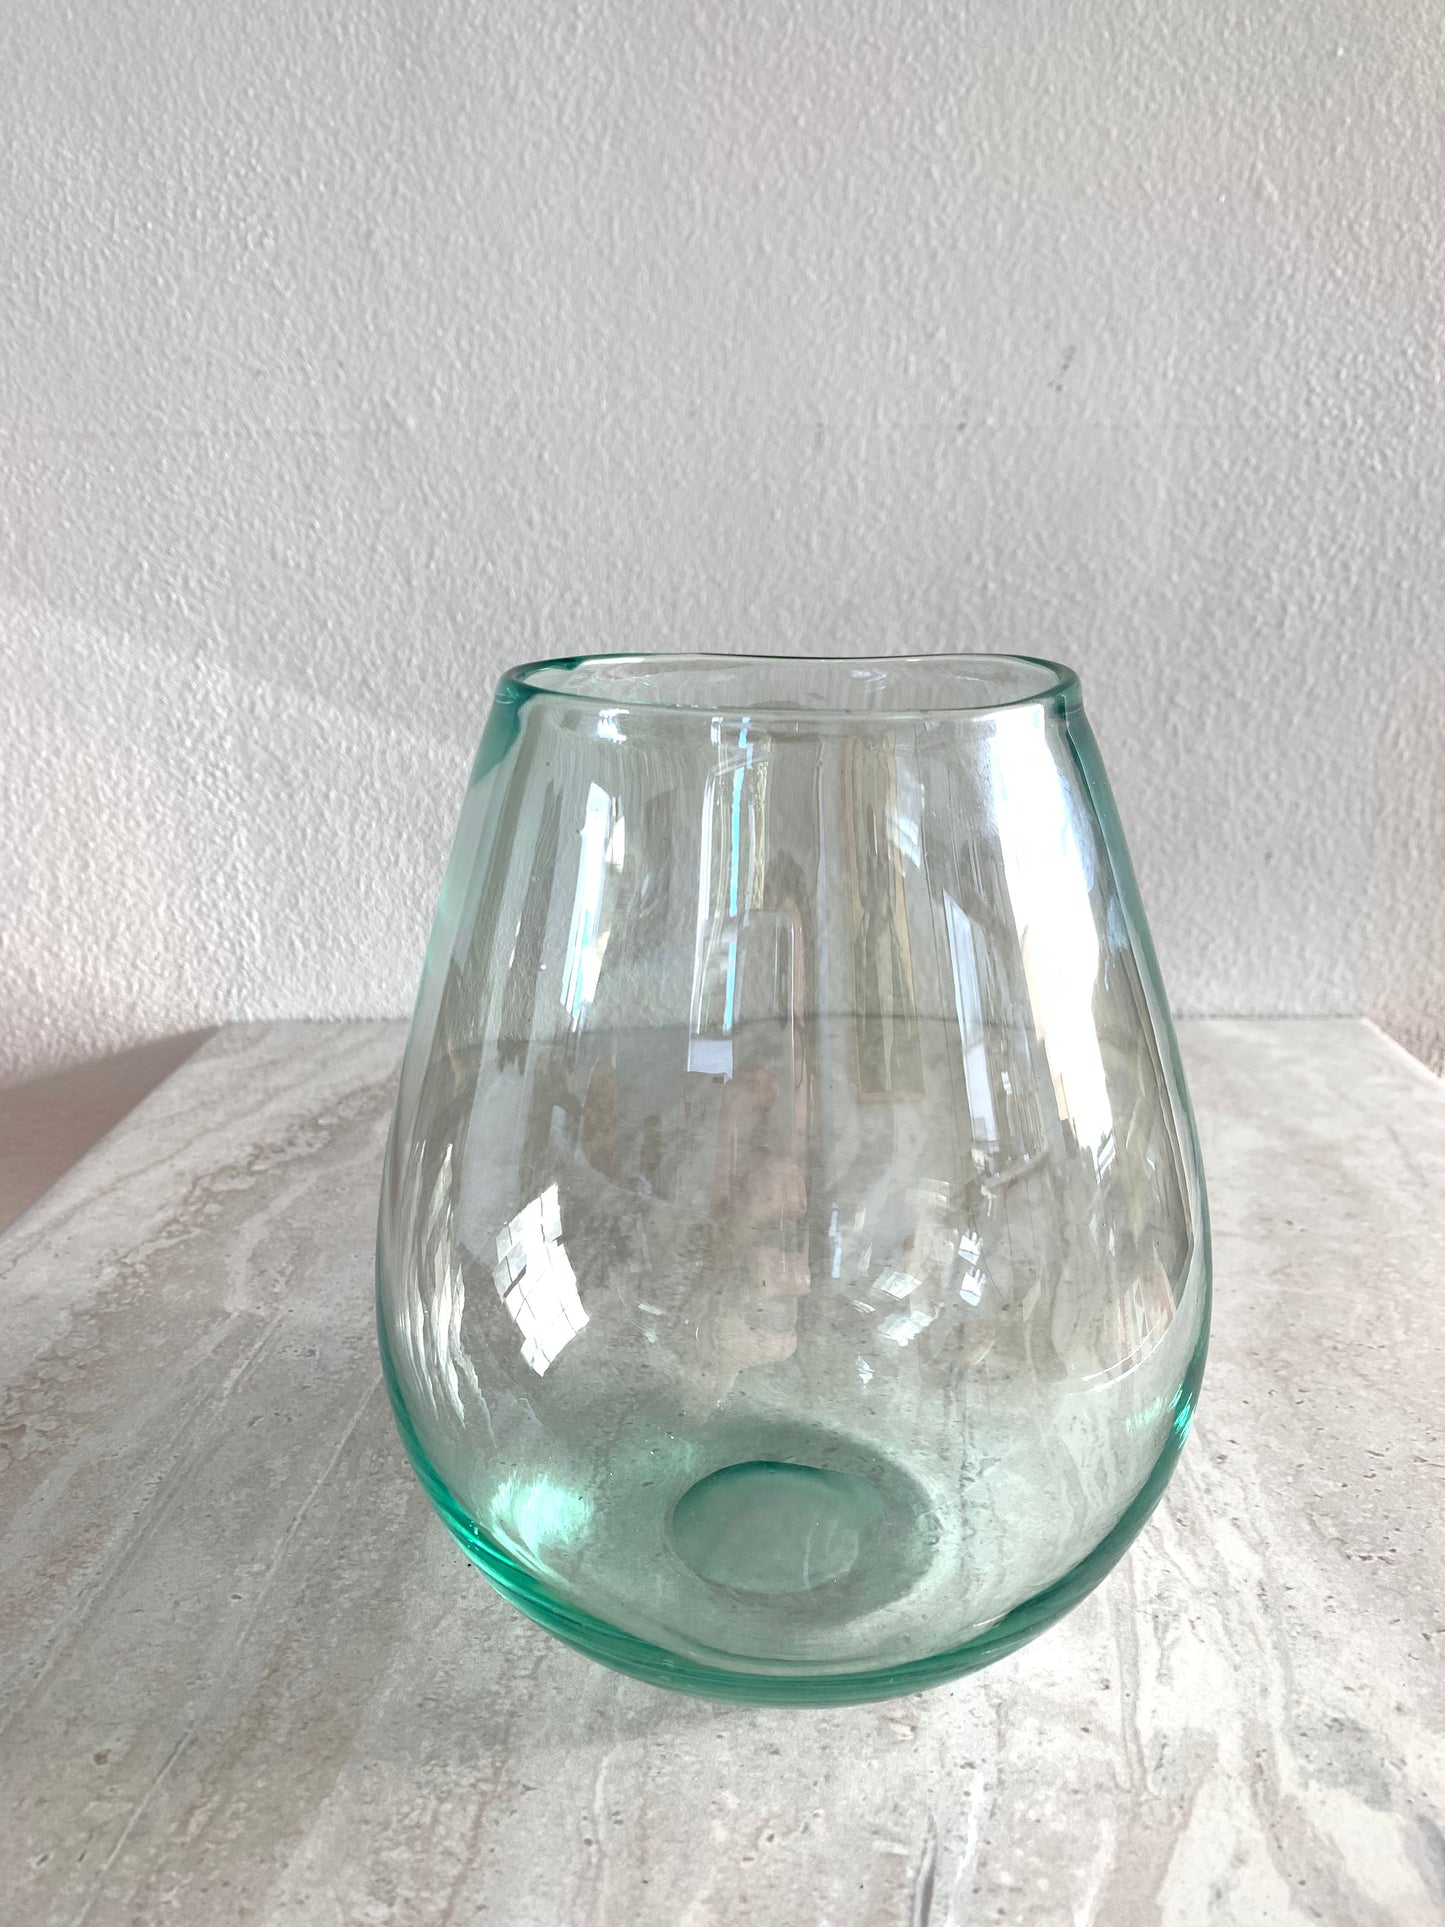 Mouth Blown Iridescent Turquoise-Green Glass Vase